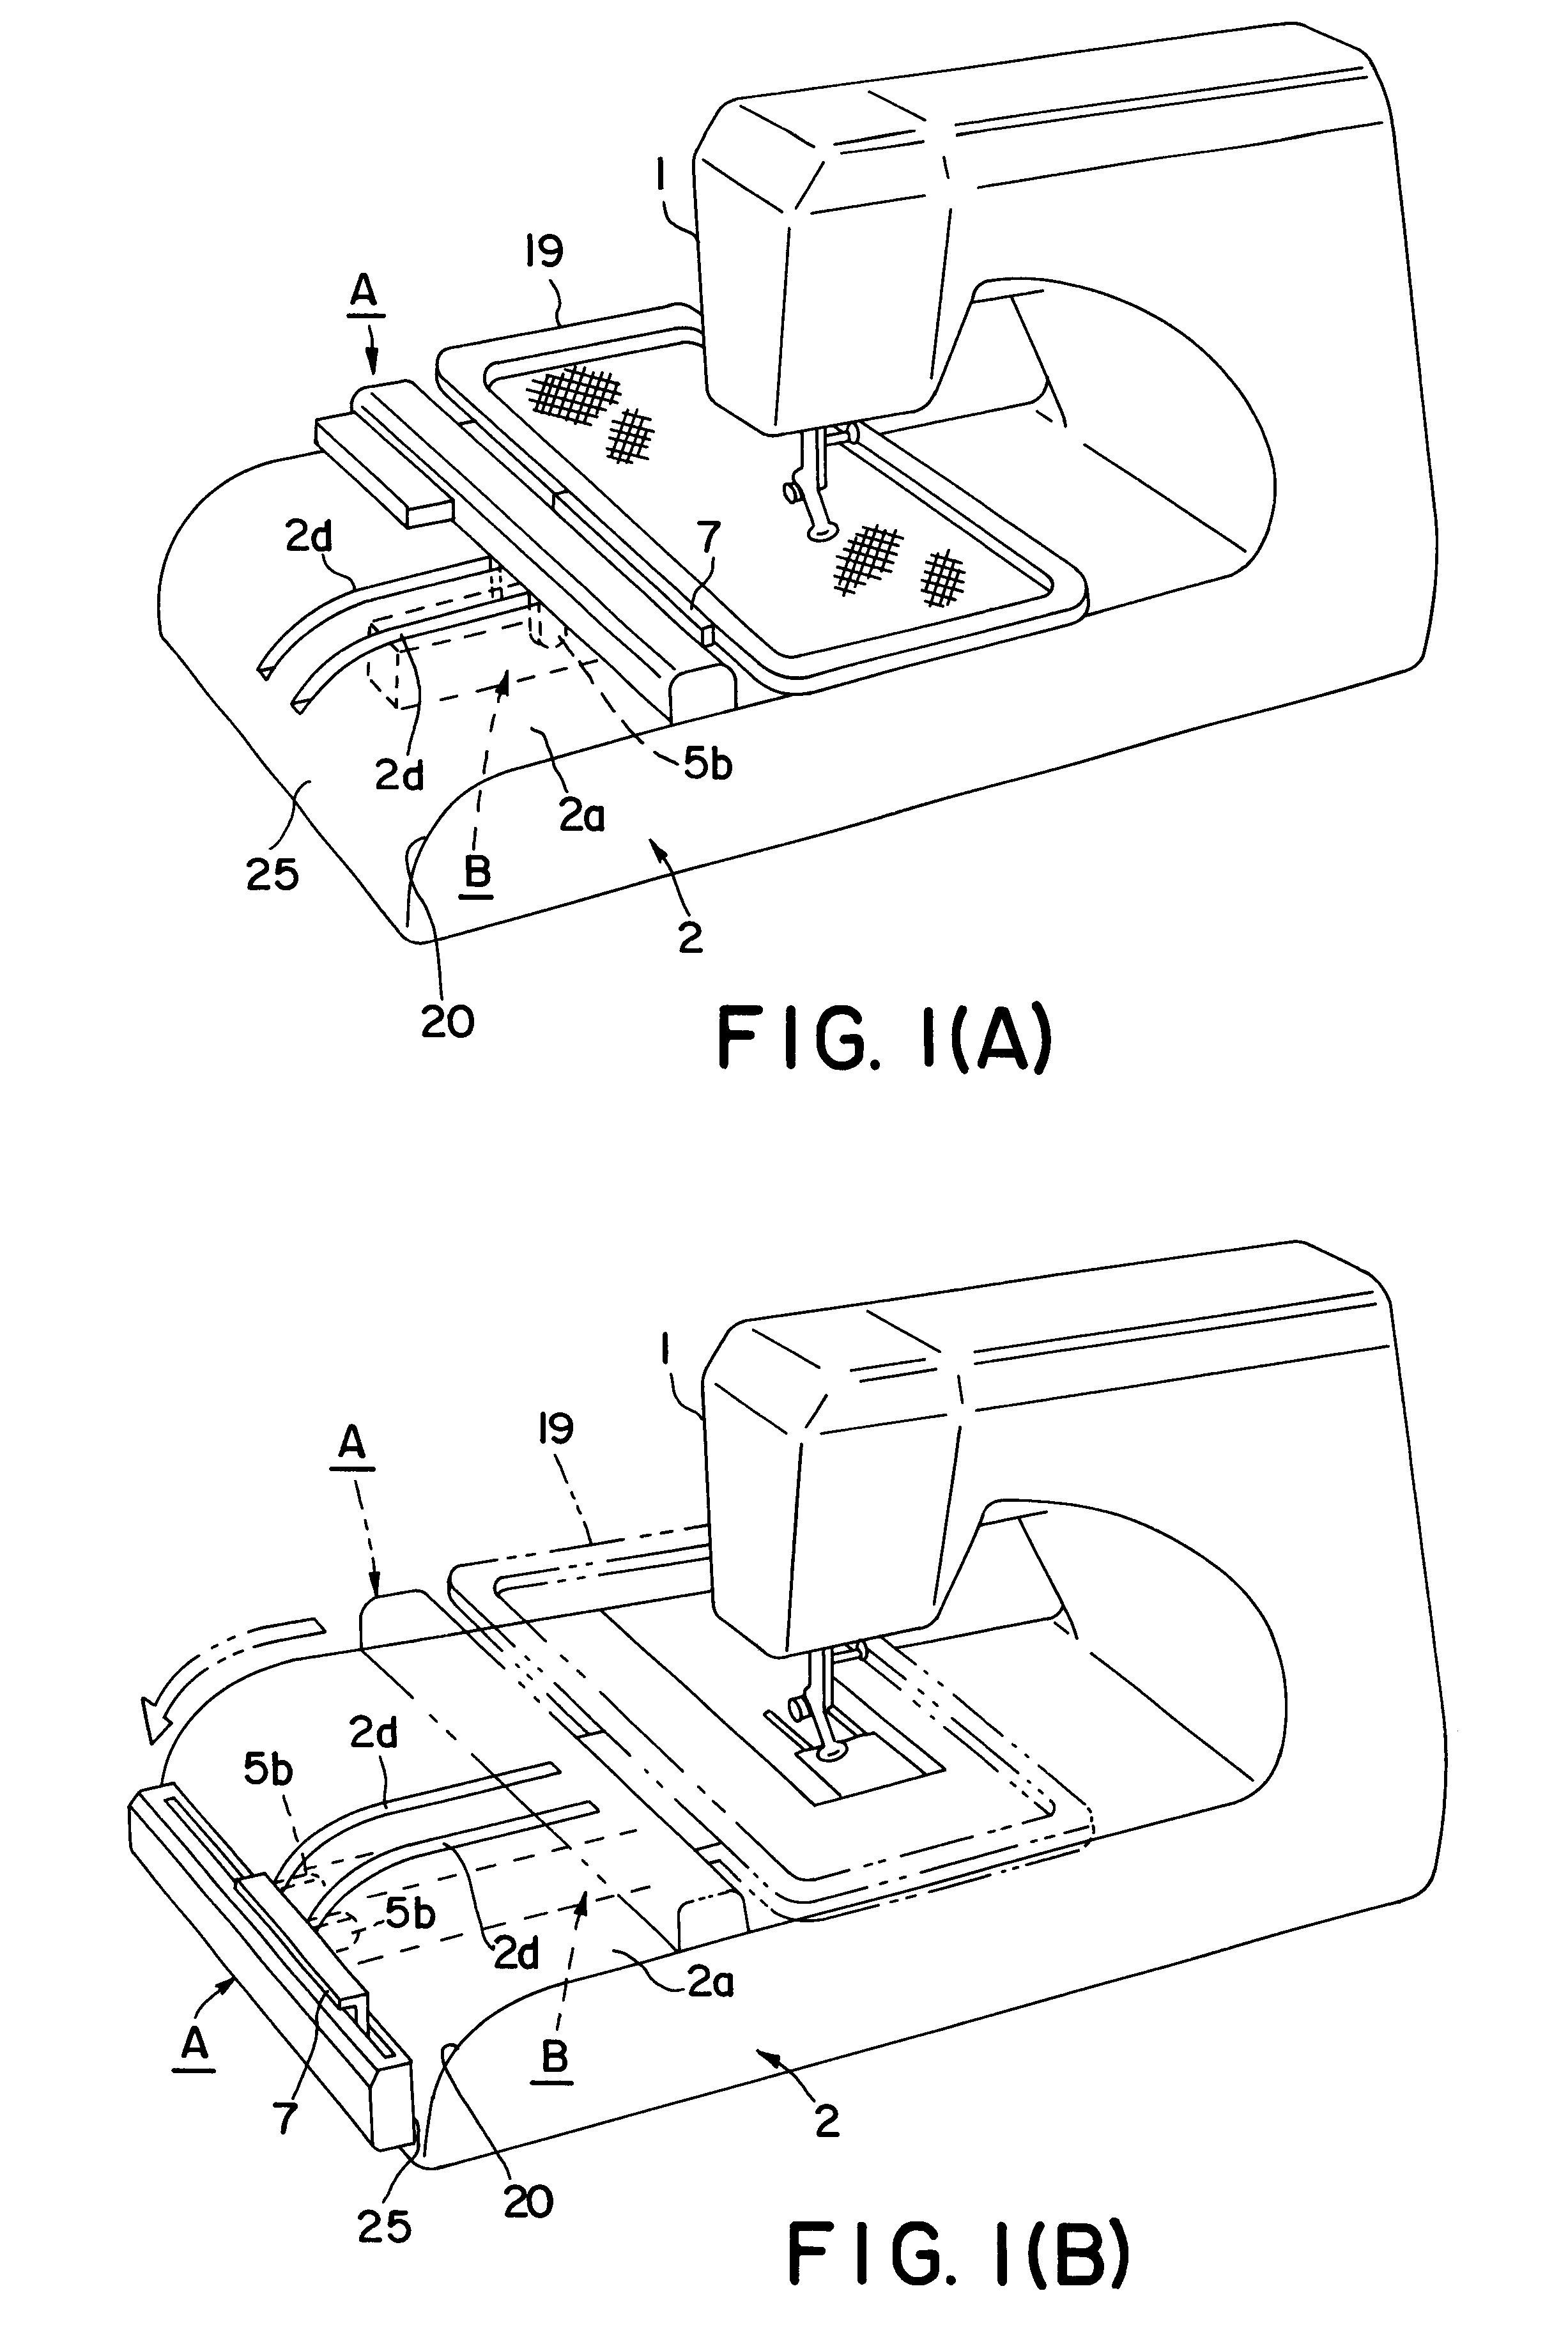 Sewing machine with an embroidery stitching function